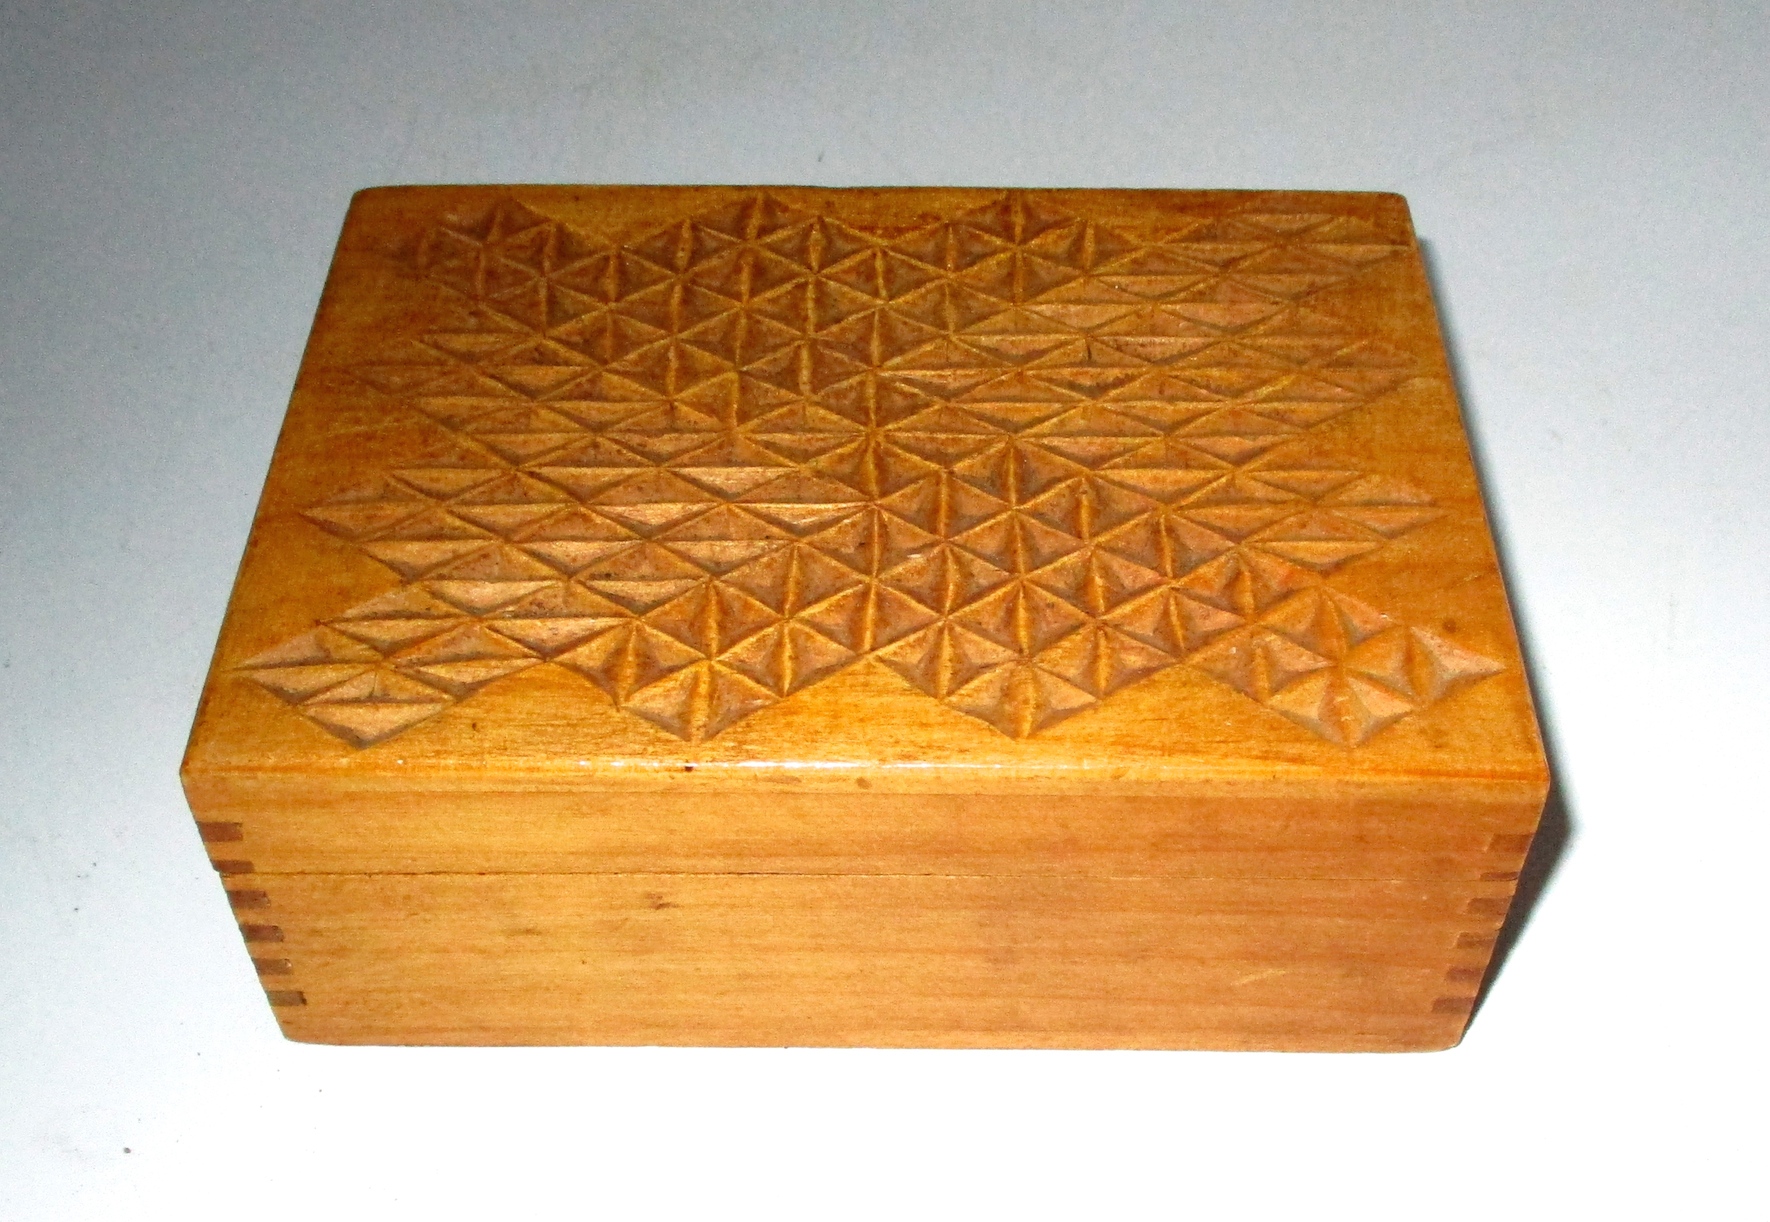 Ca. 1900 Dovetaled Pine Box w/Hand-carved Diamond Pattern in the Lid (2" x4" x5 1/2")